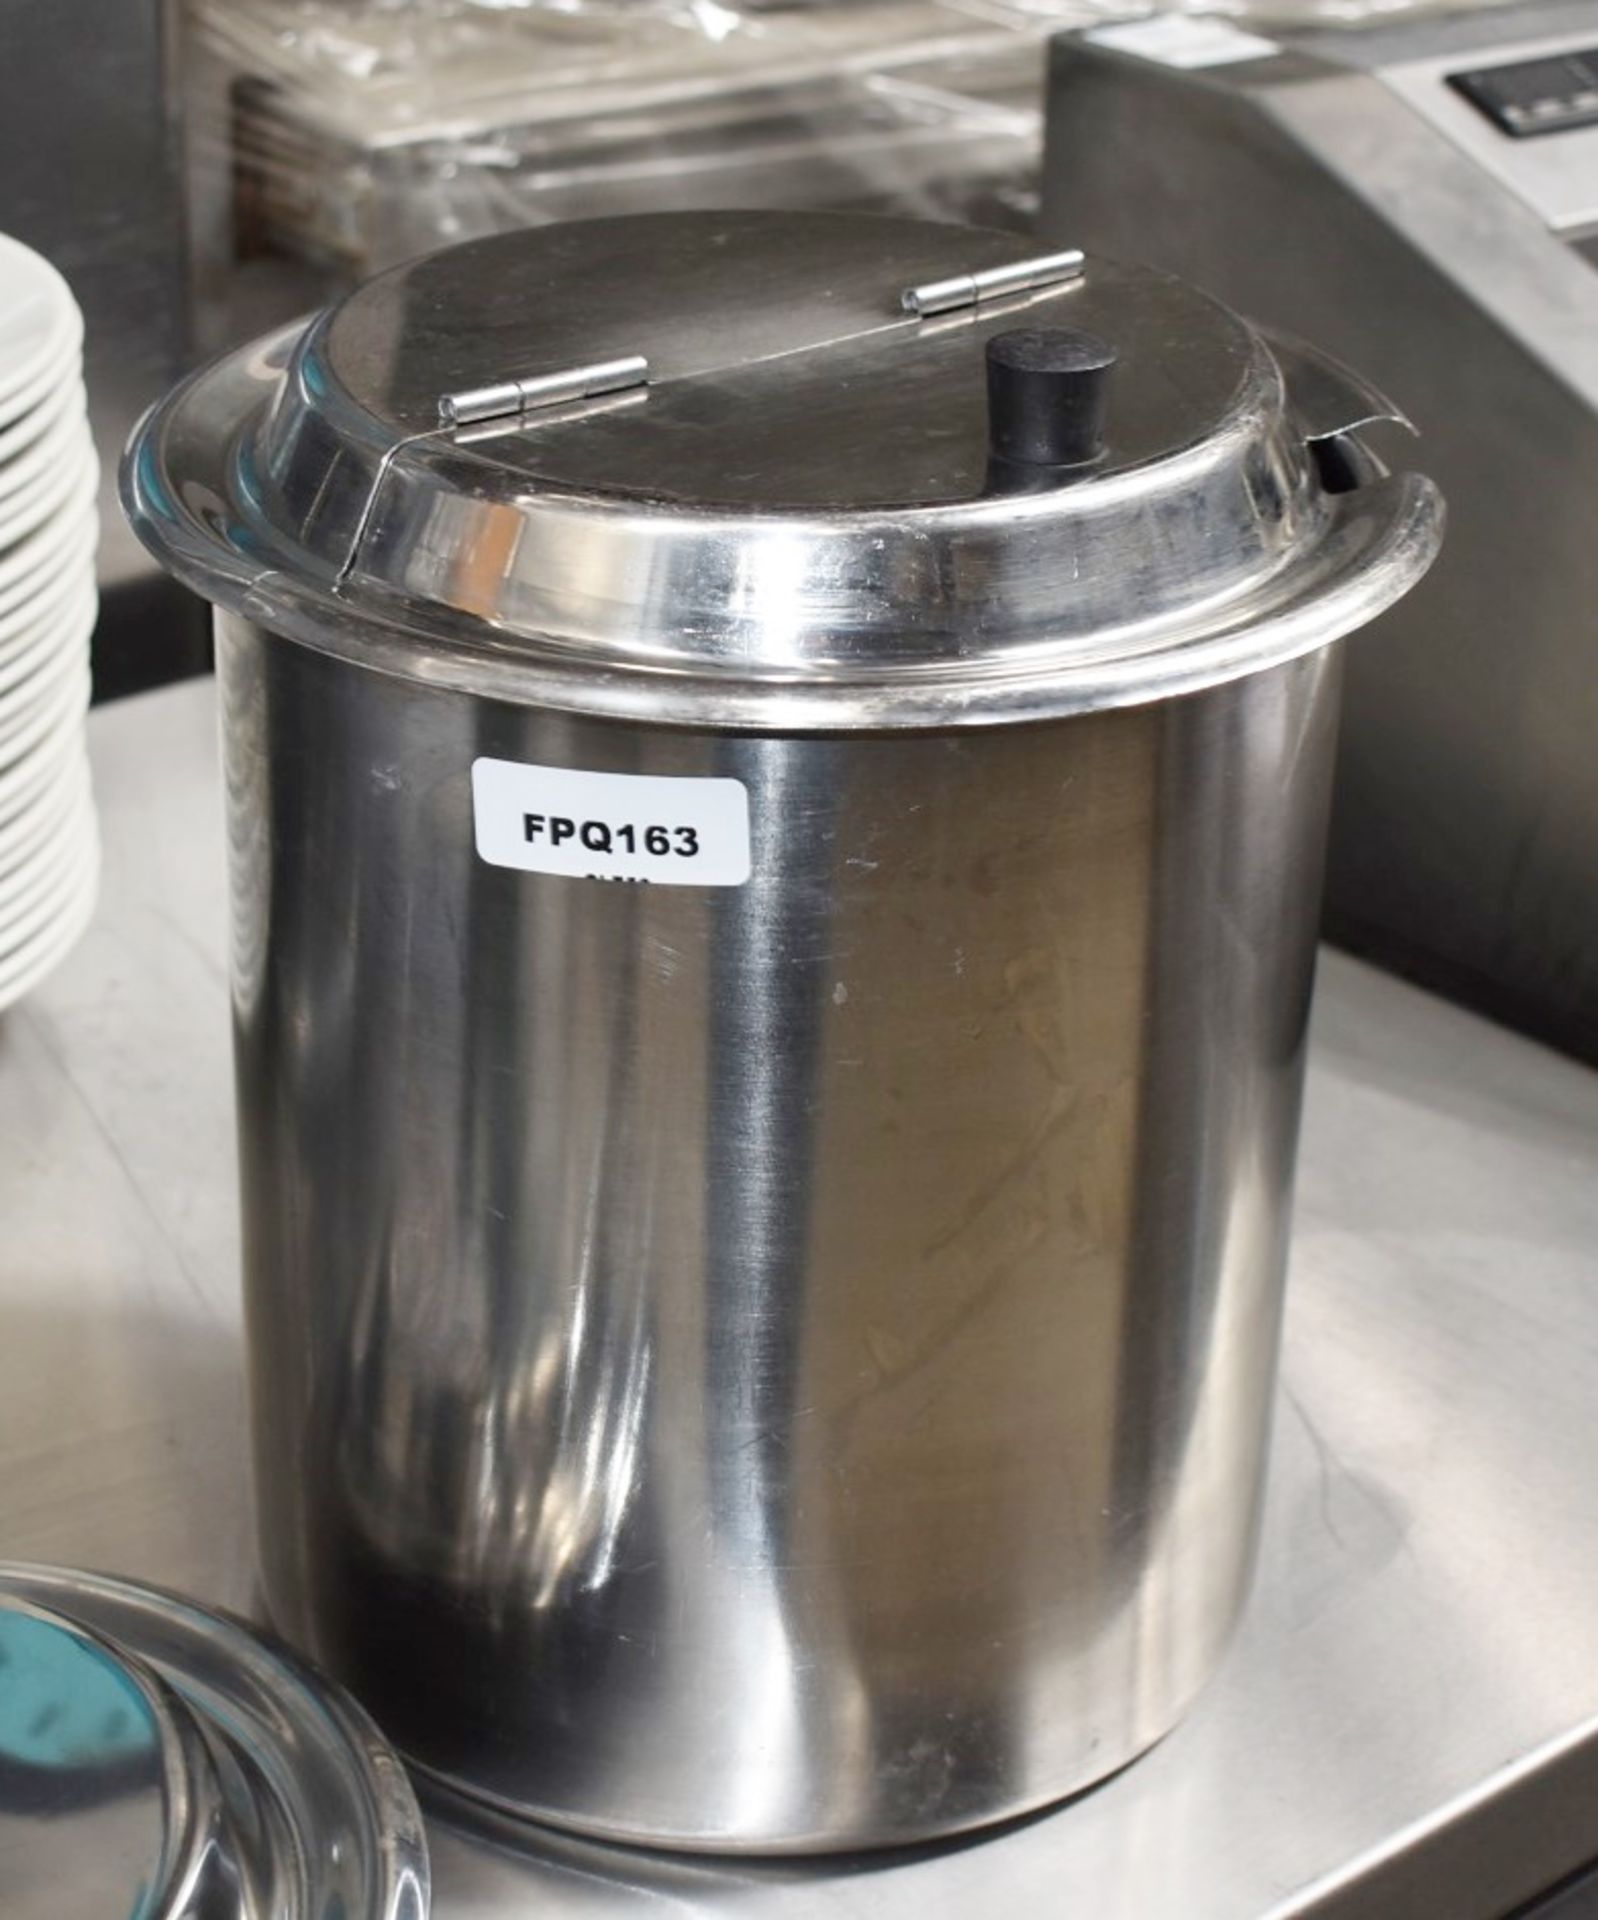 1 x Stainless Steel Serving Pot With Two Folding Lids - Size: H29 x Dia 25 cm - Image 2 of 6